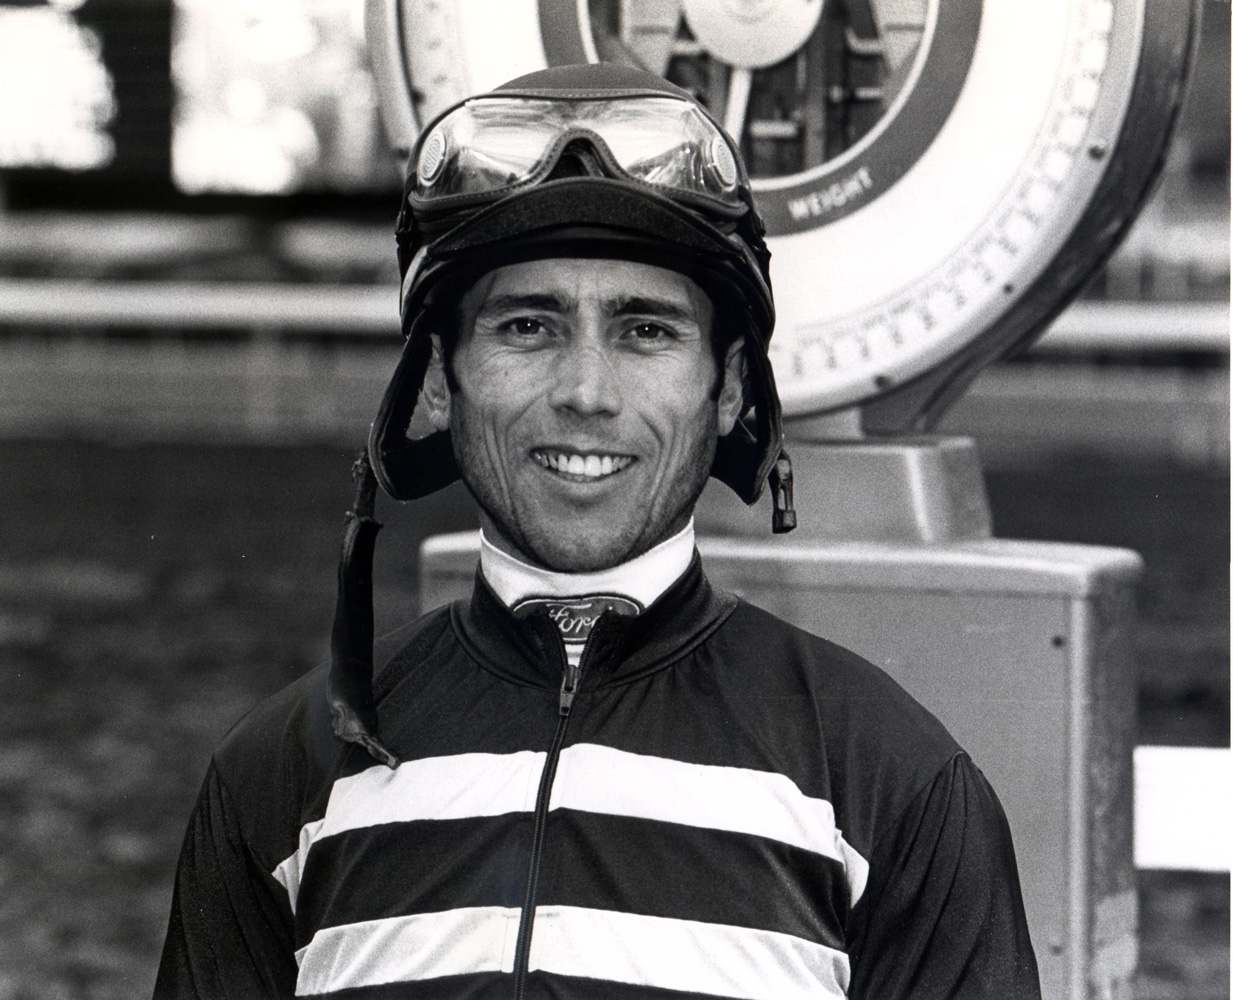 Garrett Gomez weighing in after a win at Santa Anita Park in 2005 (Bill Mochon/Museum Collection)